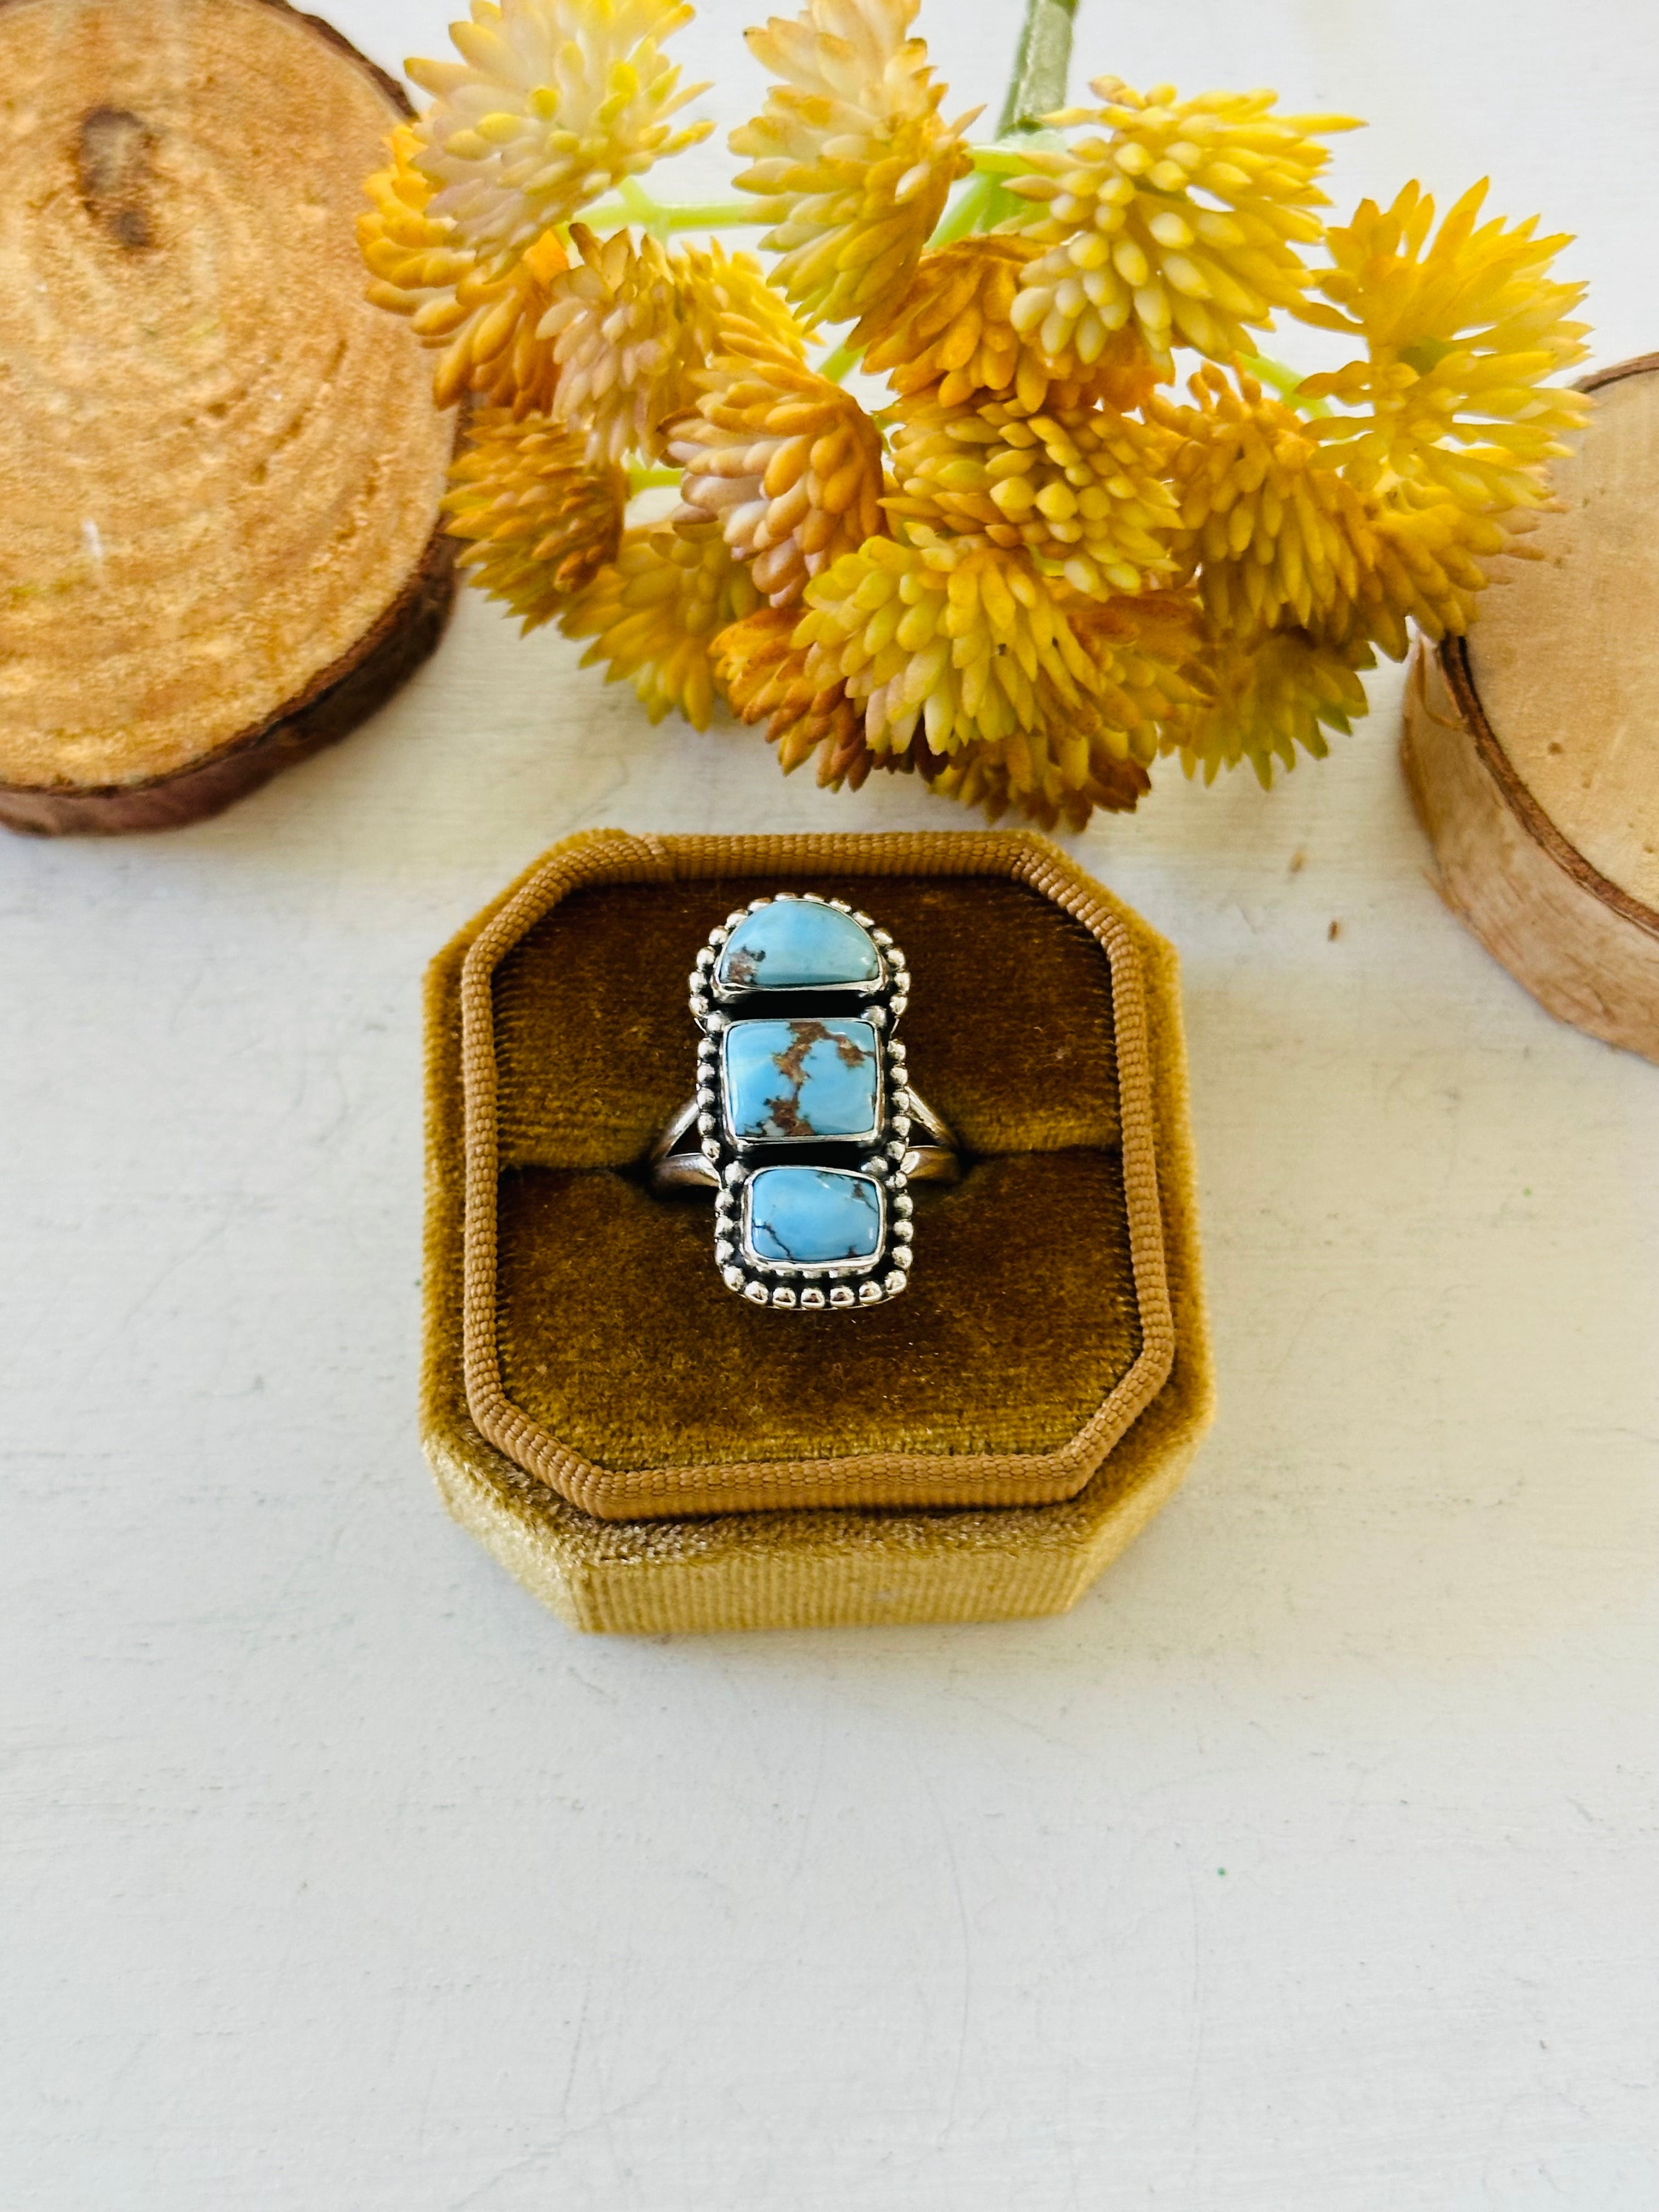 Southwest Handmade Golden Hills Turquoise & Sterling Silver Ring Size 7.25